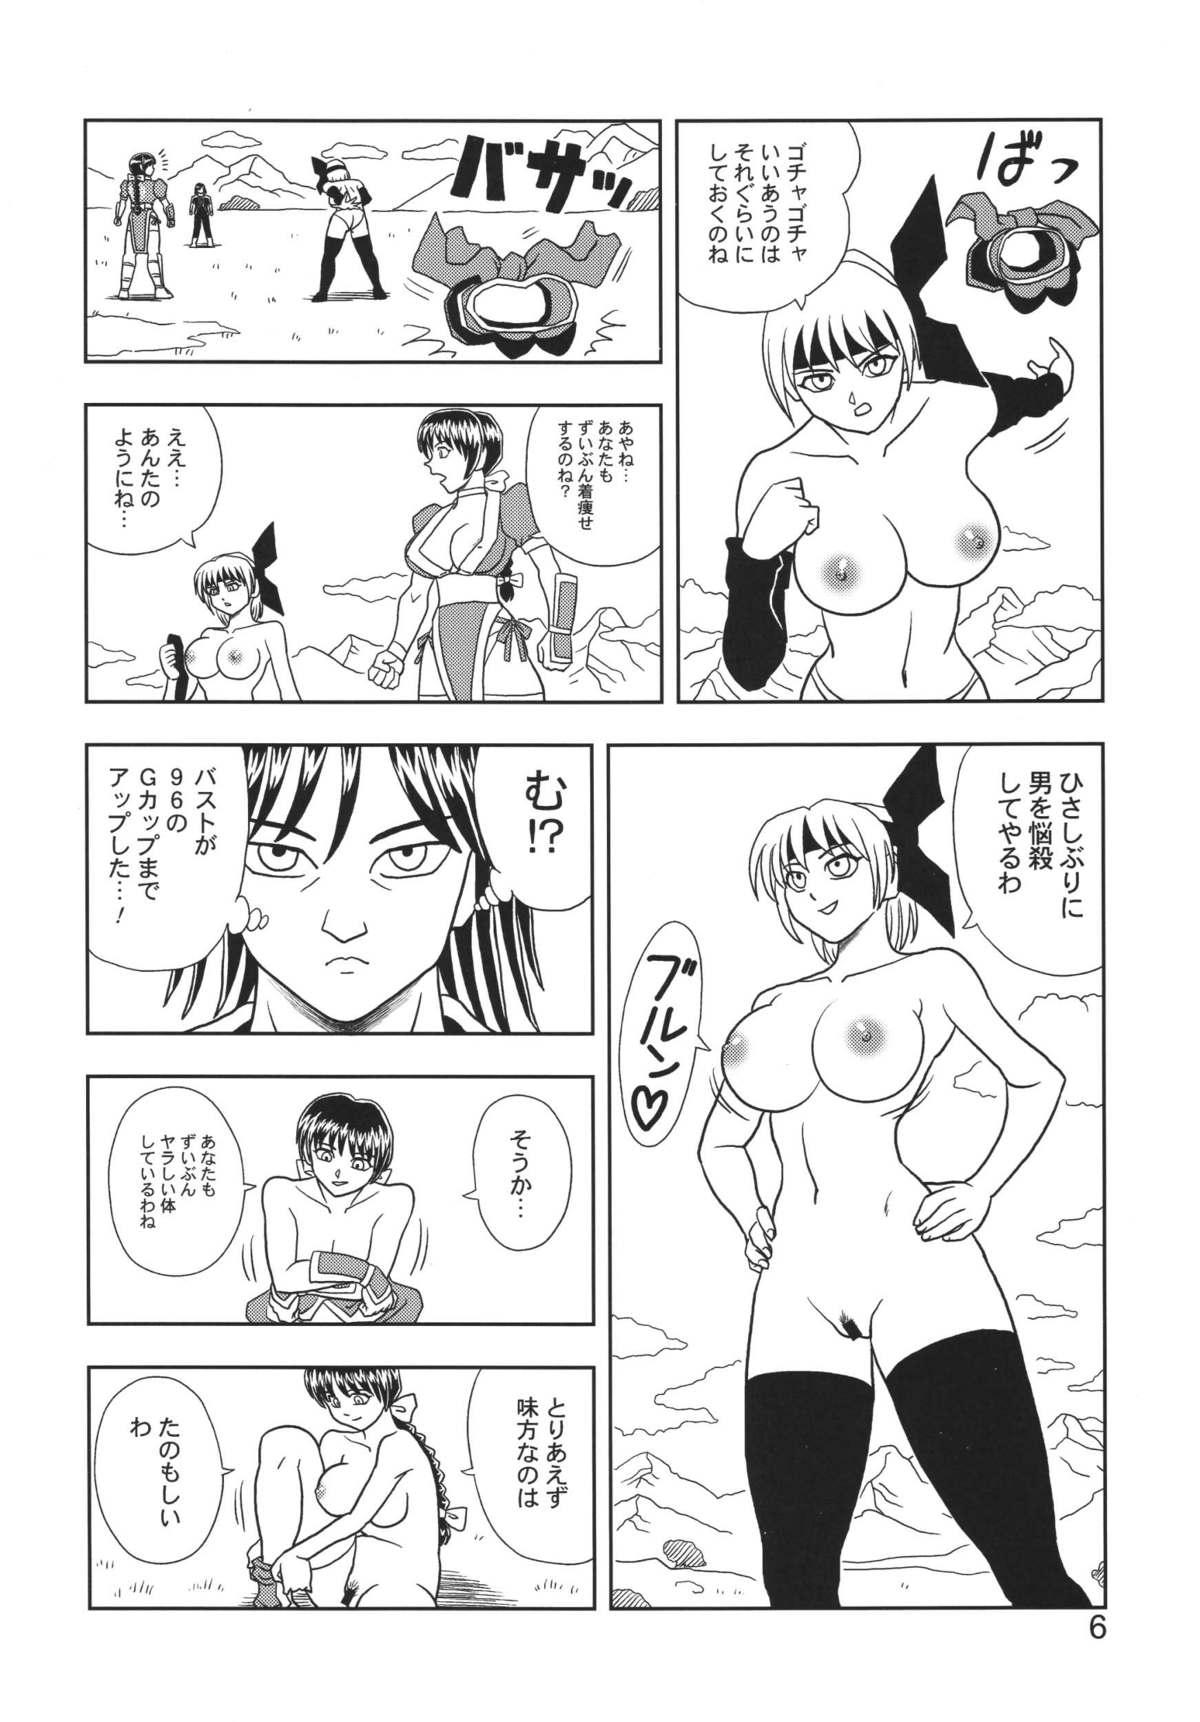 Rough Kasumi or Ayane - Dead or alive Abg - Page 6